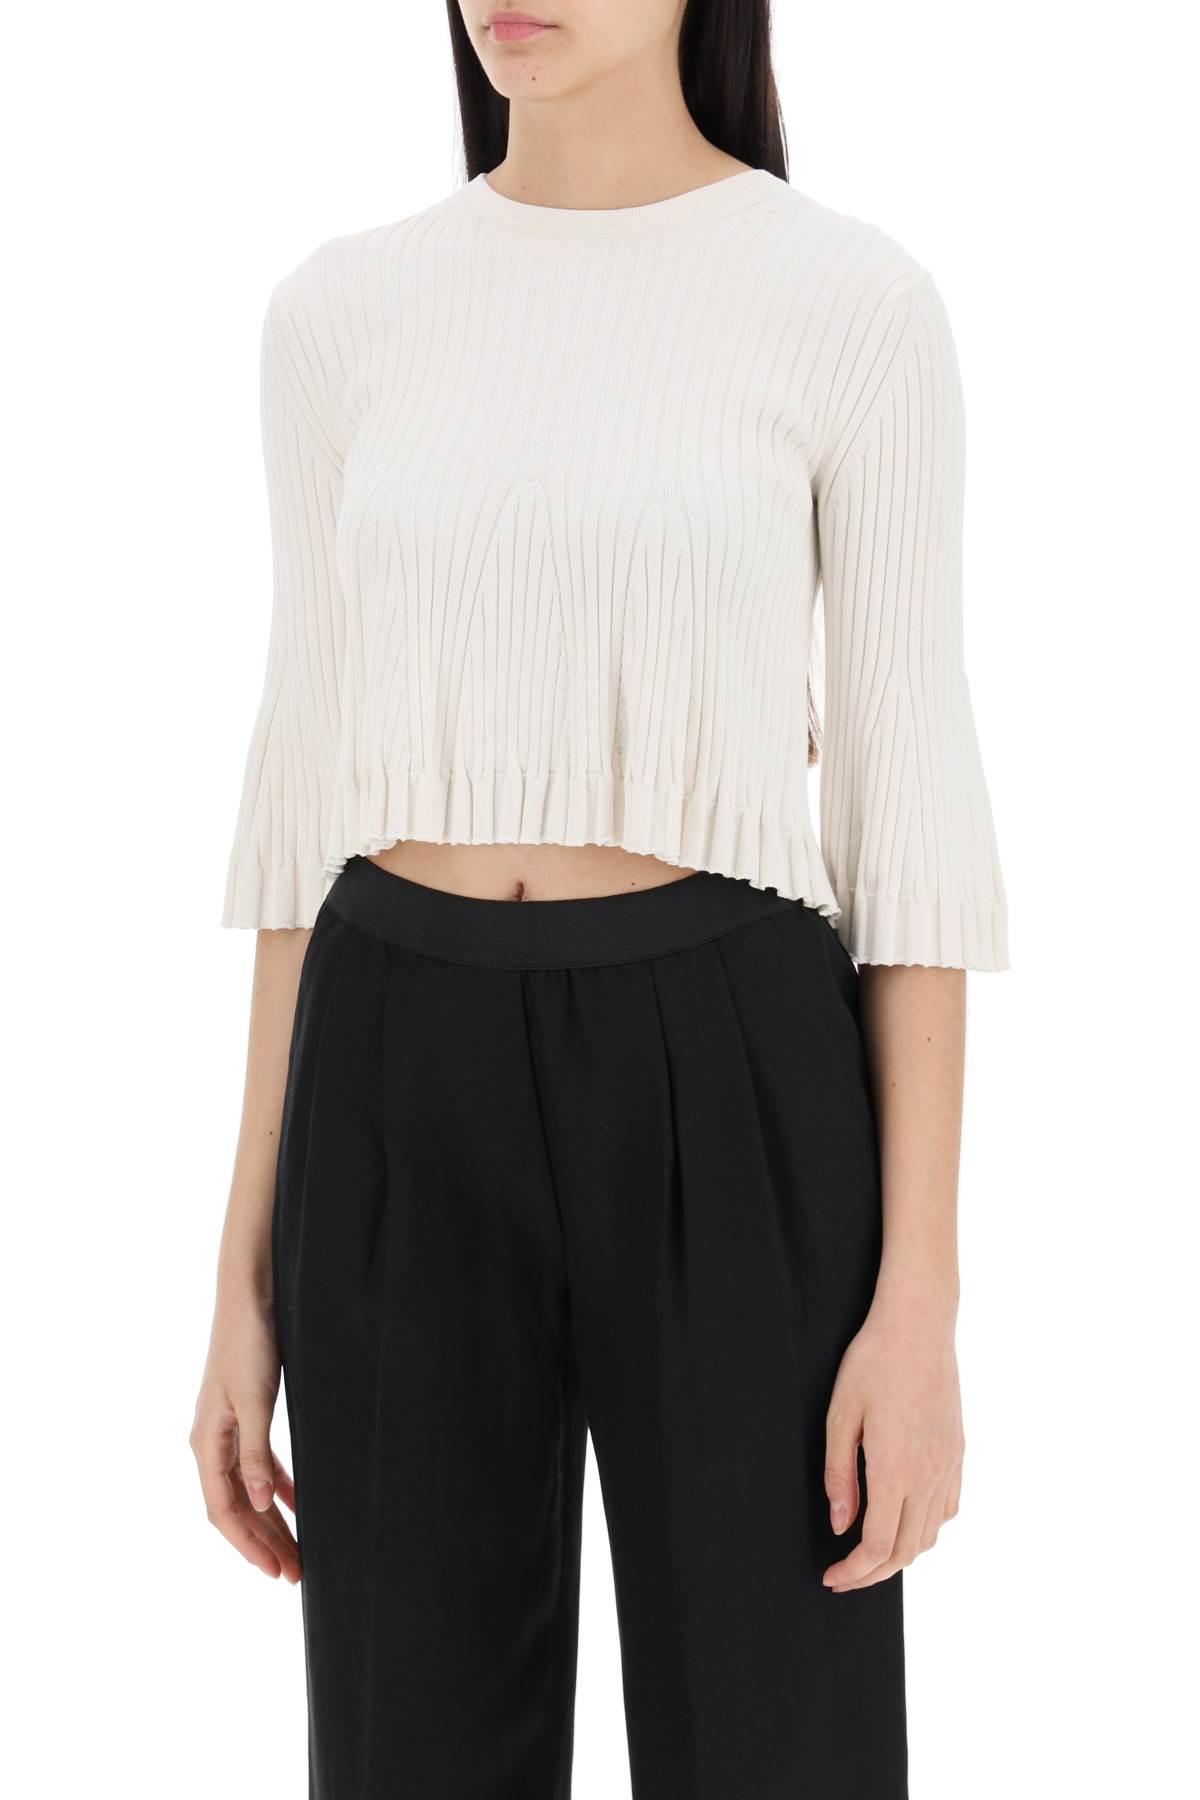 LOULOU STUDIO LOULOU STUDIO Silk and cotton knit Ammi crop top in